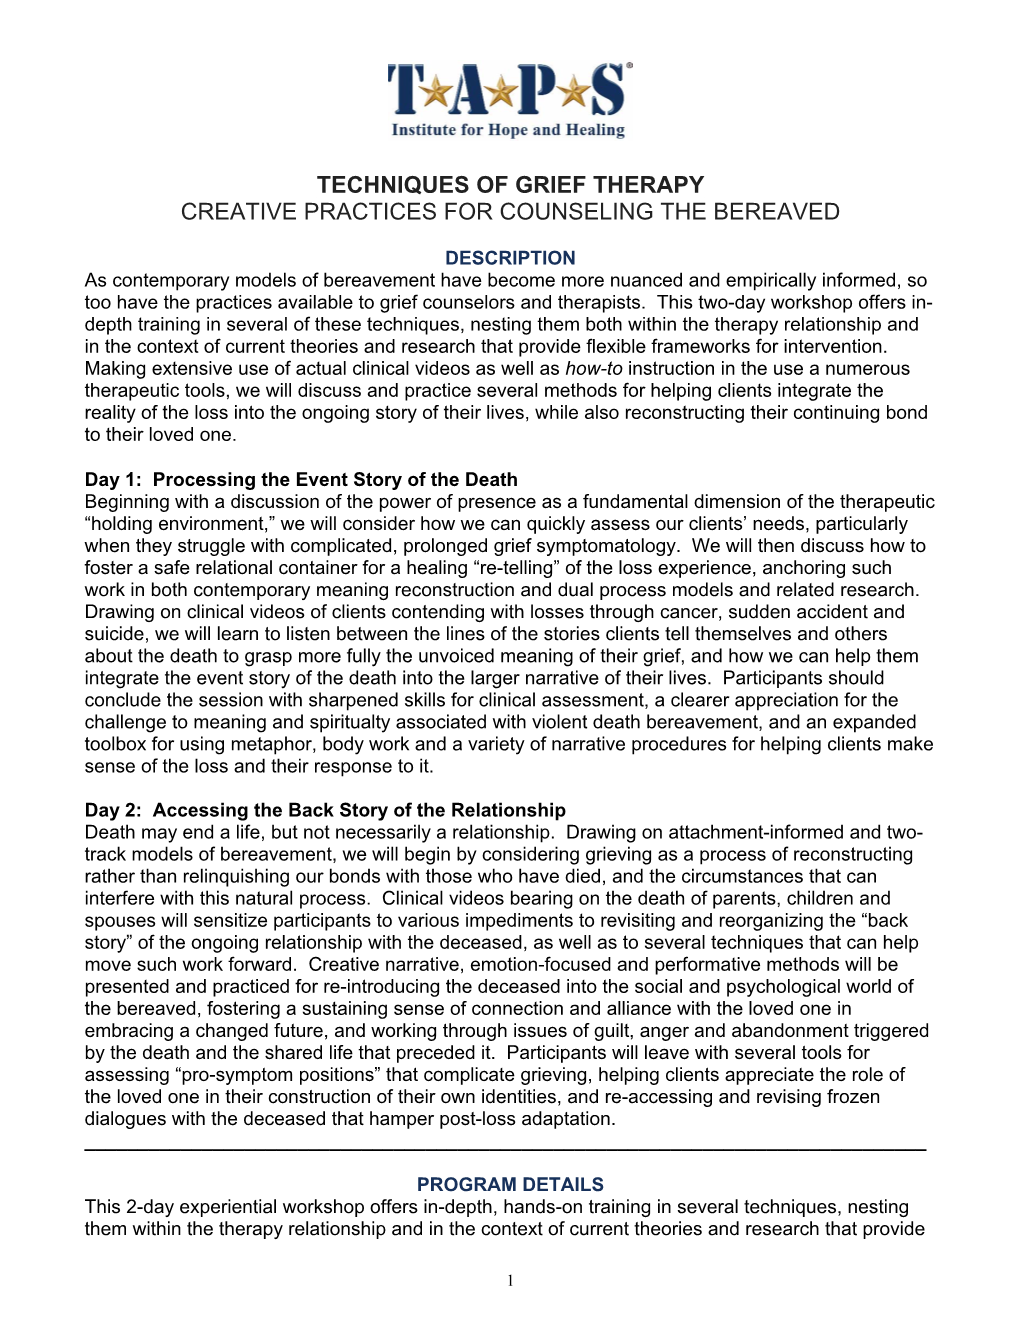 Techniques of Grief Therapy Creative Practices for Counseling the Bereaved